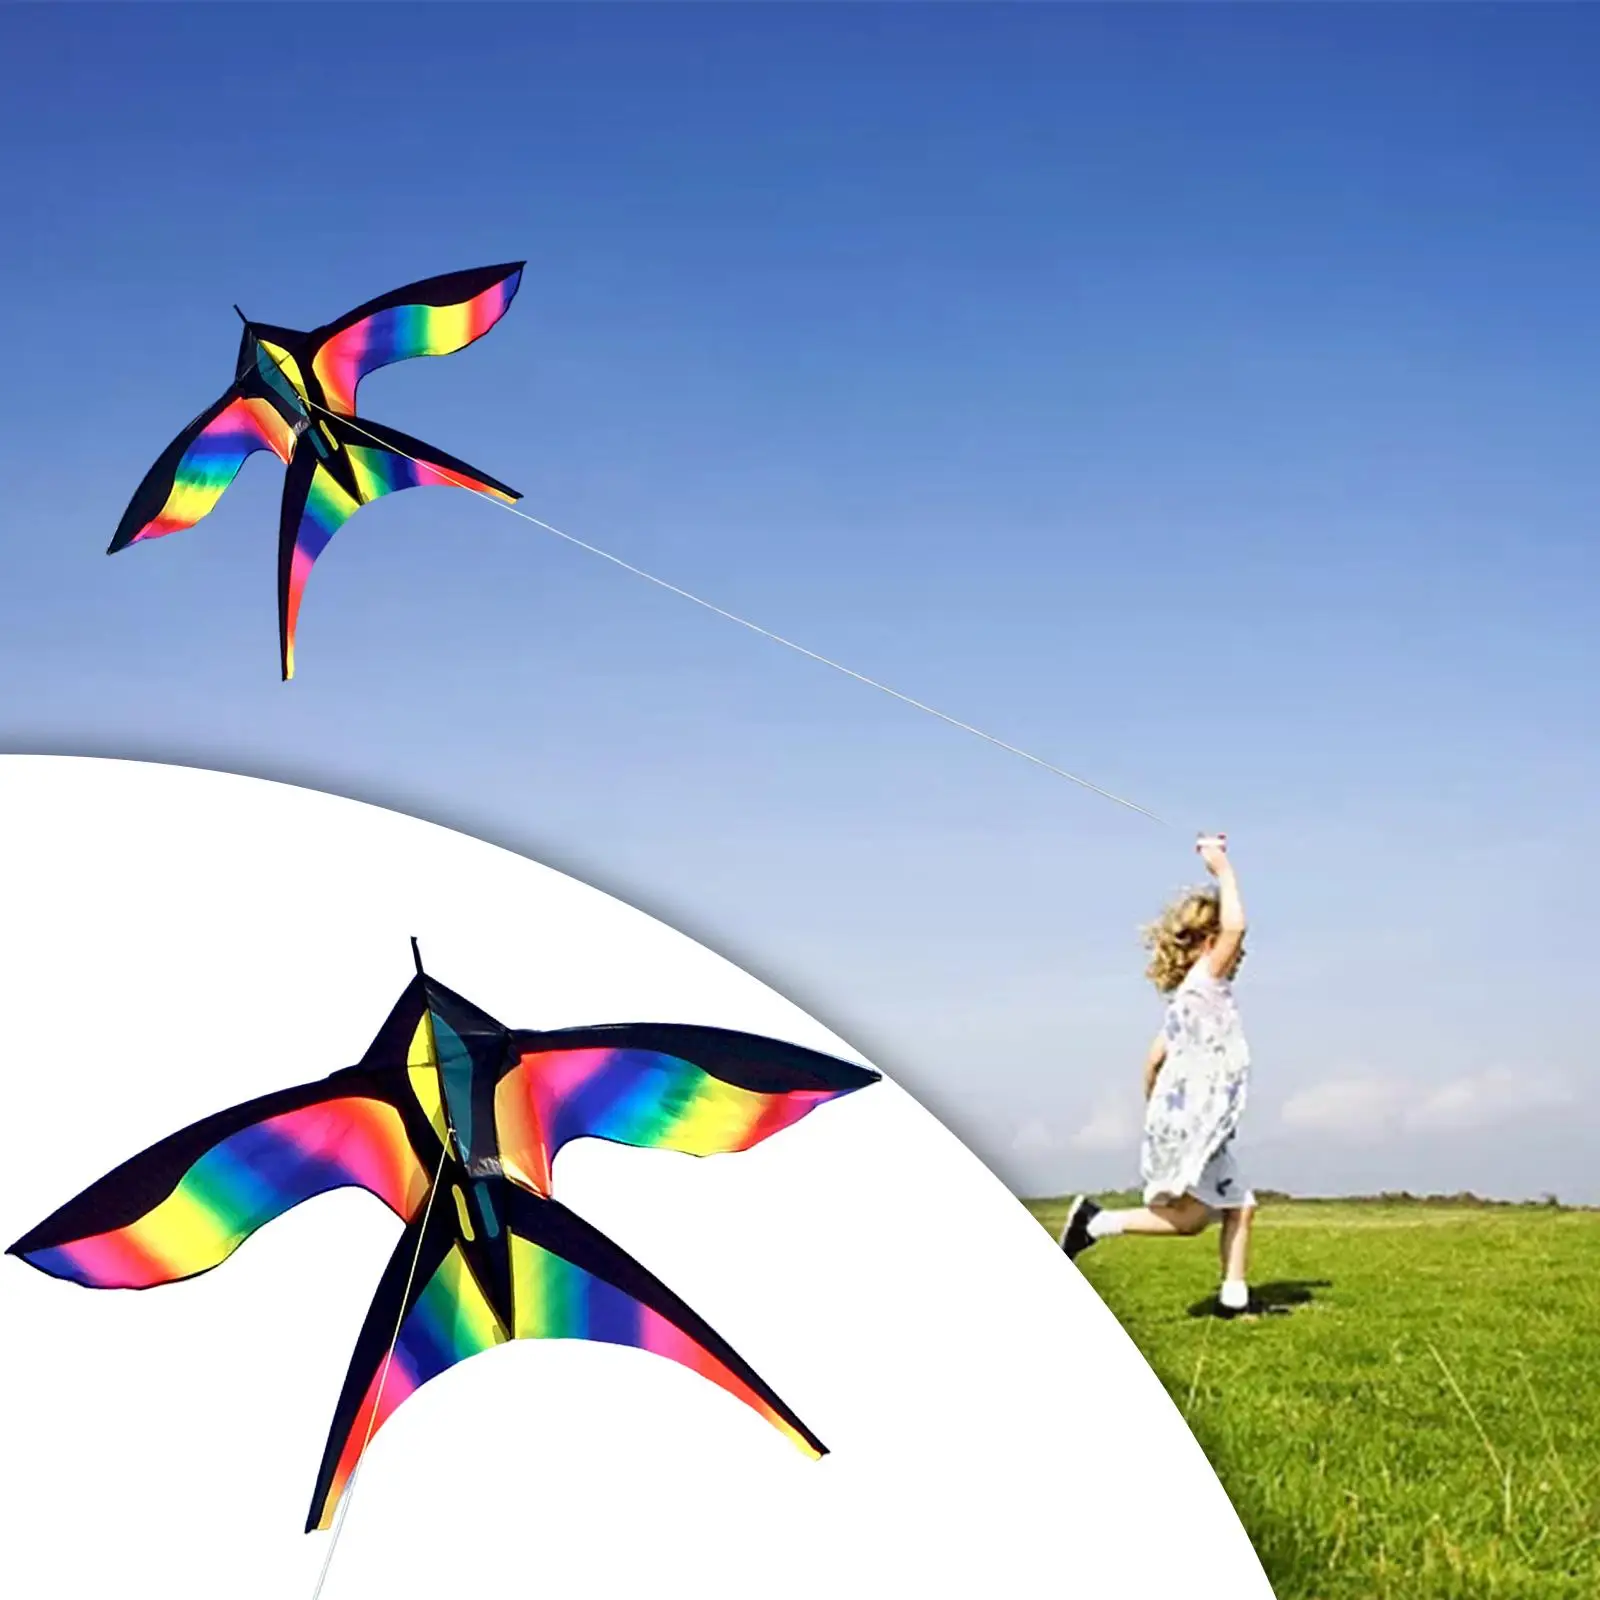 Colorful Bird Kite Swallow Kite Easy to Fly Huge Wingspan Single Line Giant for Garden Outdoor Kids Adults Activities Games